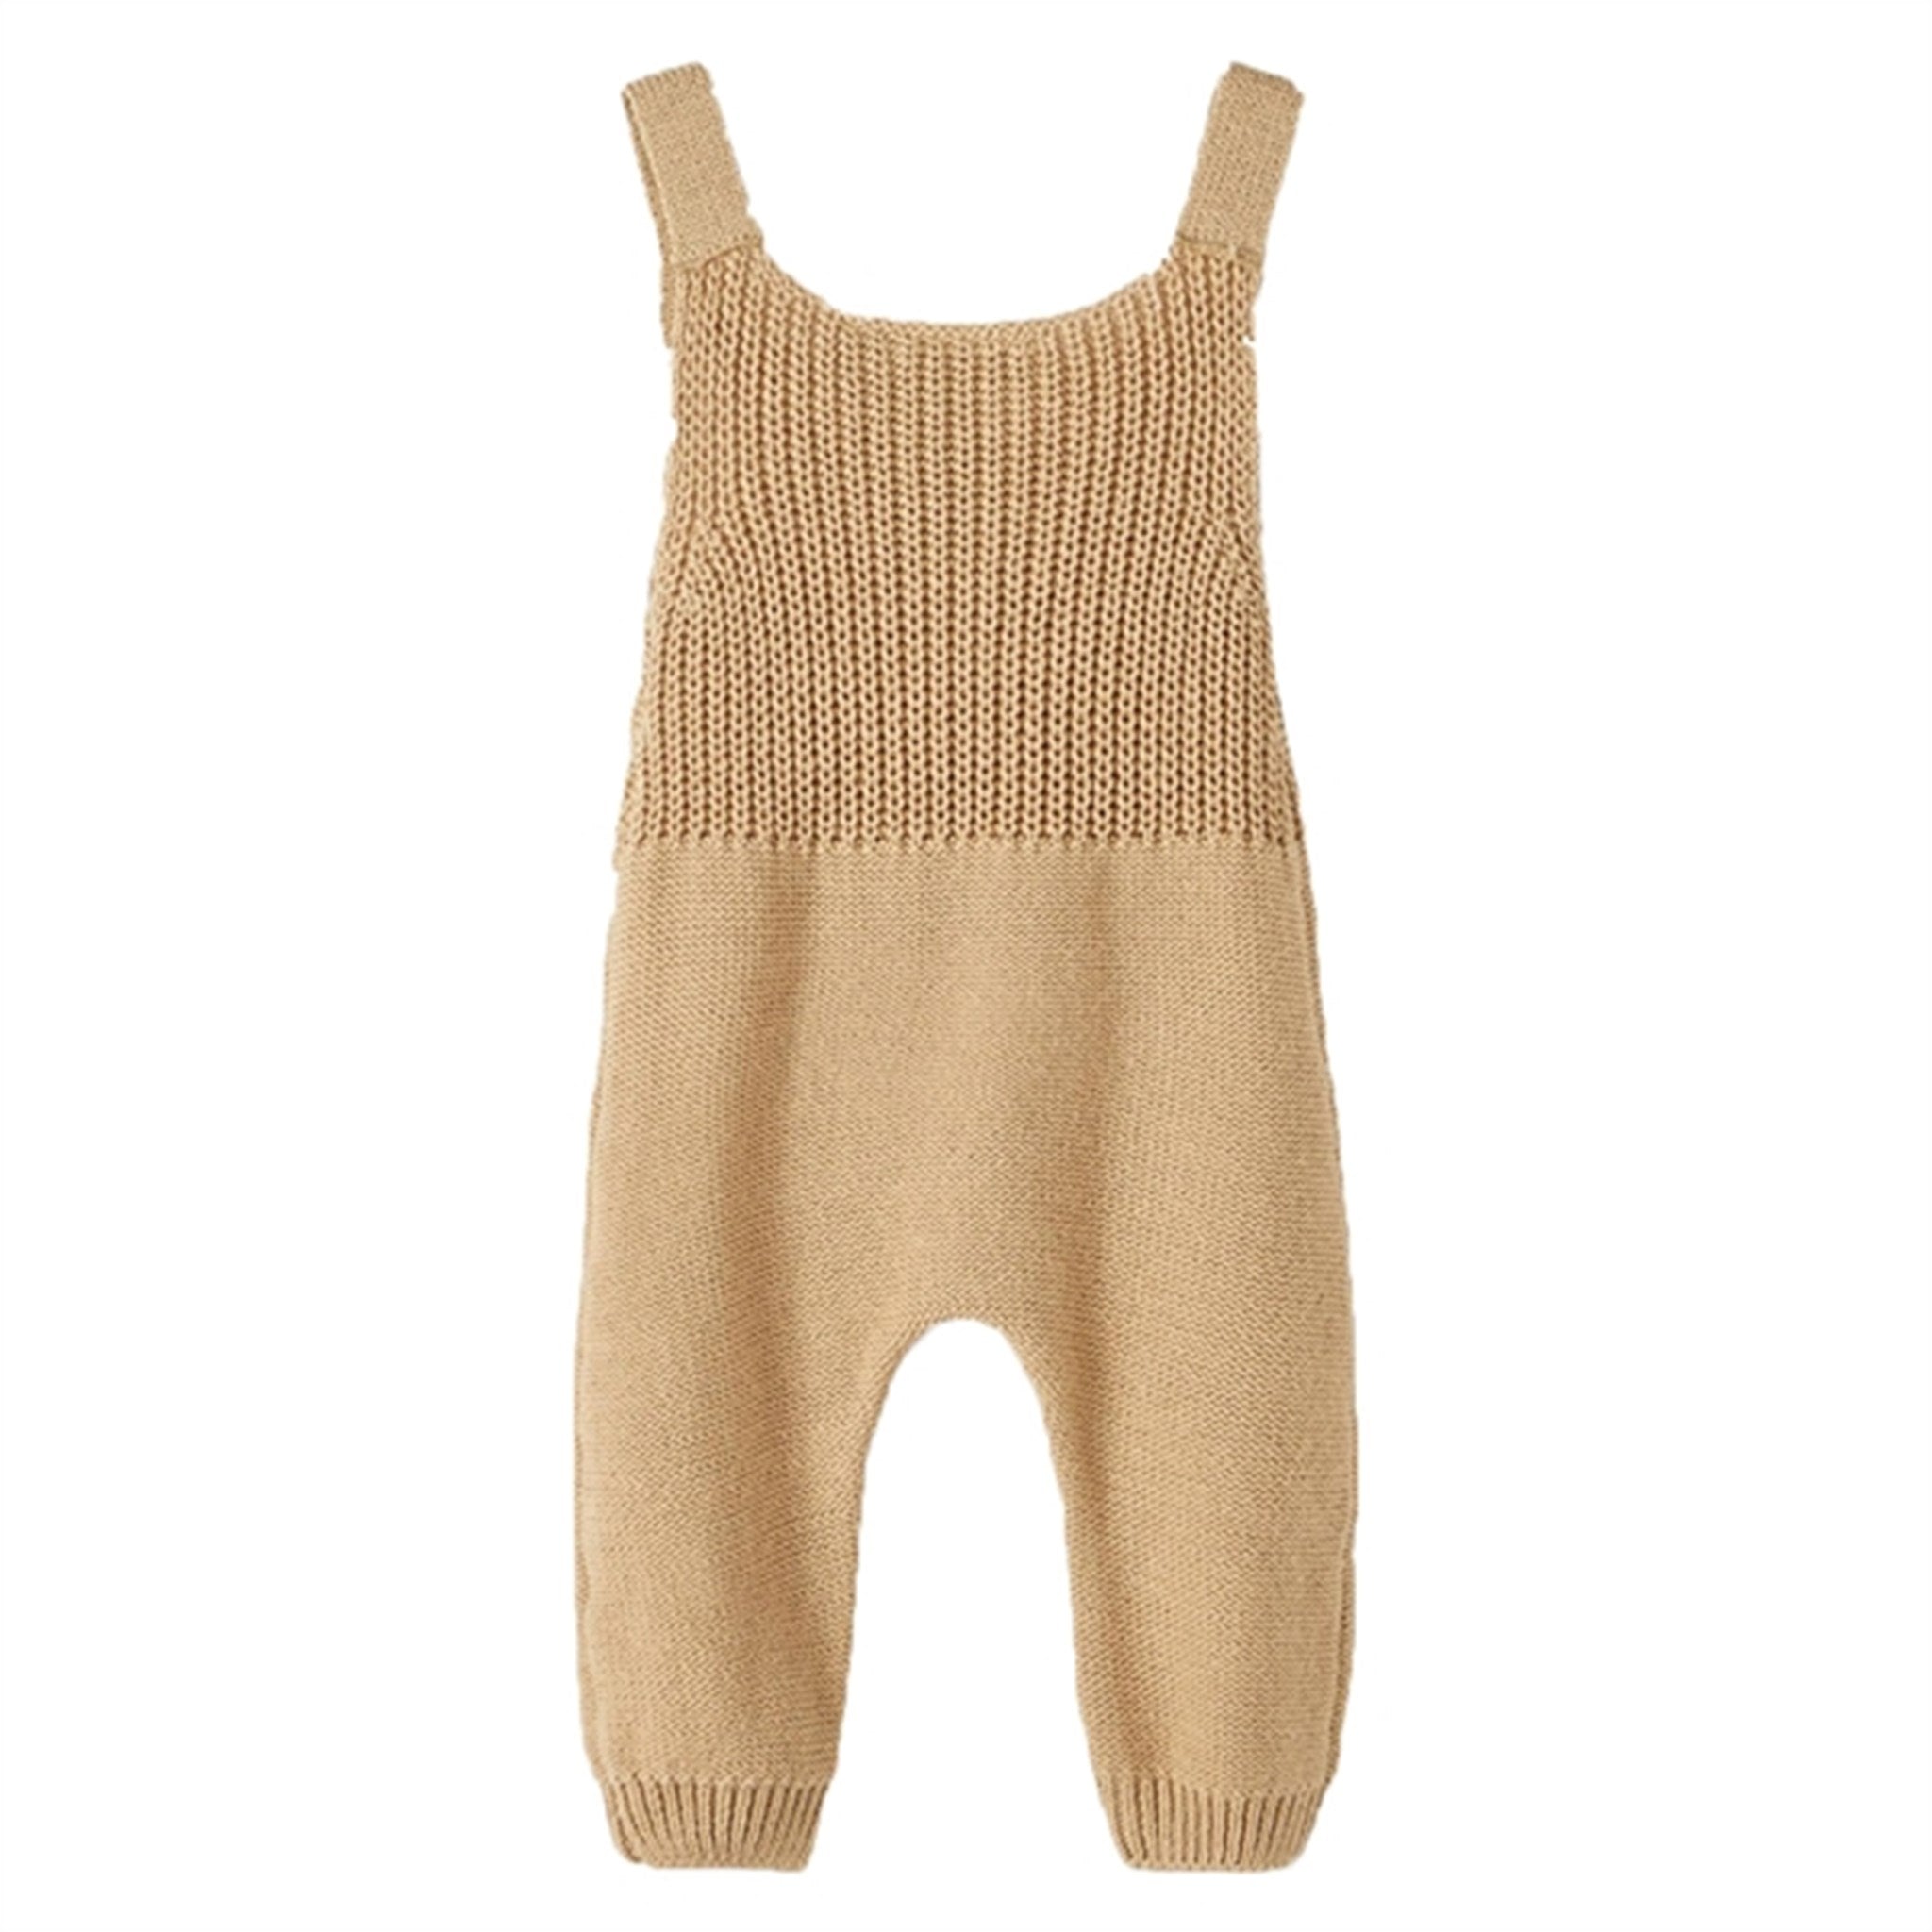 Lil' Atelier Curds & Whey Laguno Loose Knit Overall 3